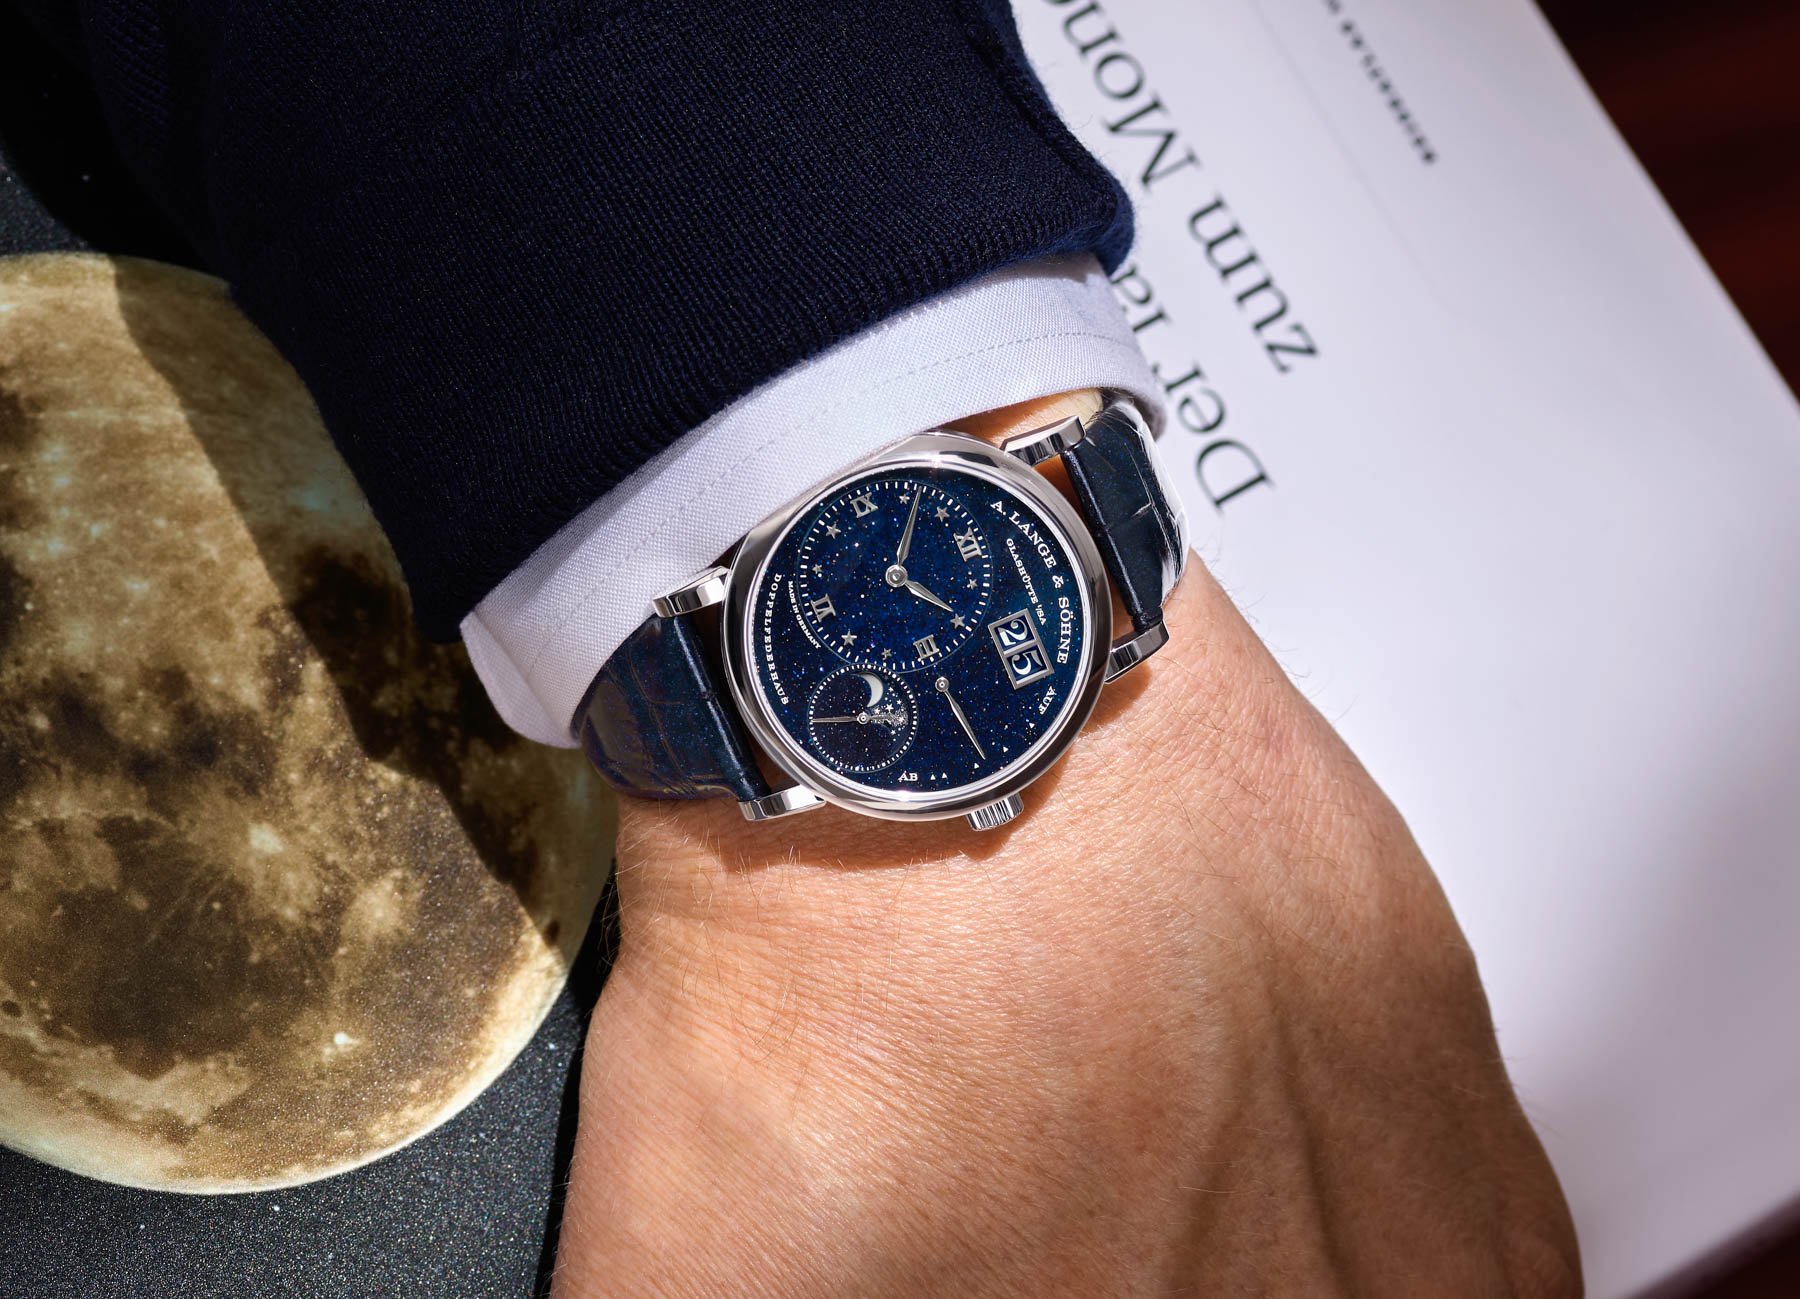 New Watch: A. Lange & Söhne Little Lange 1 Moon Phase